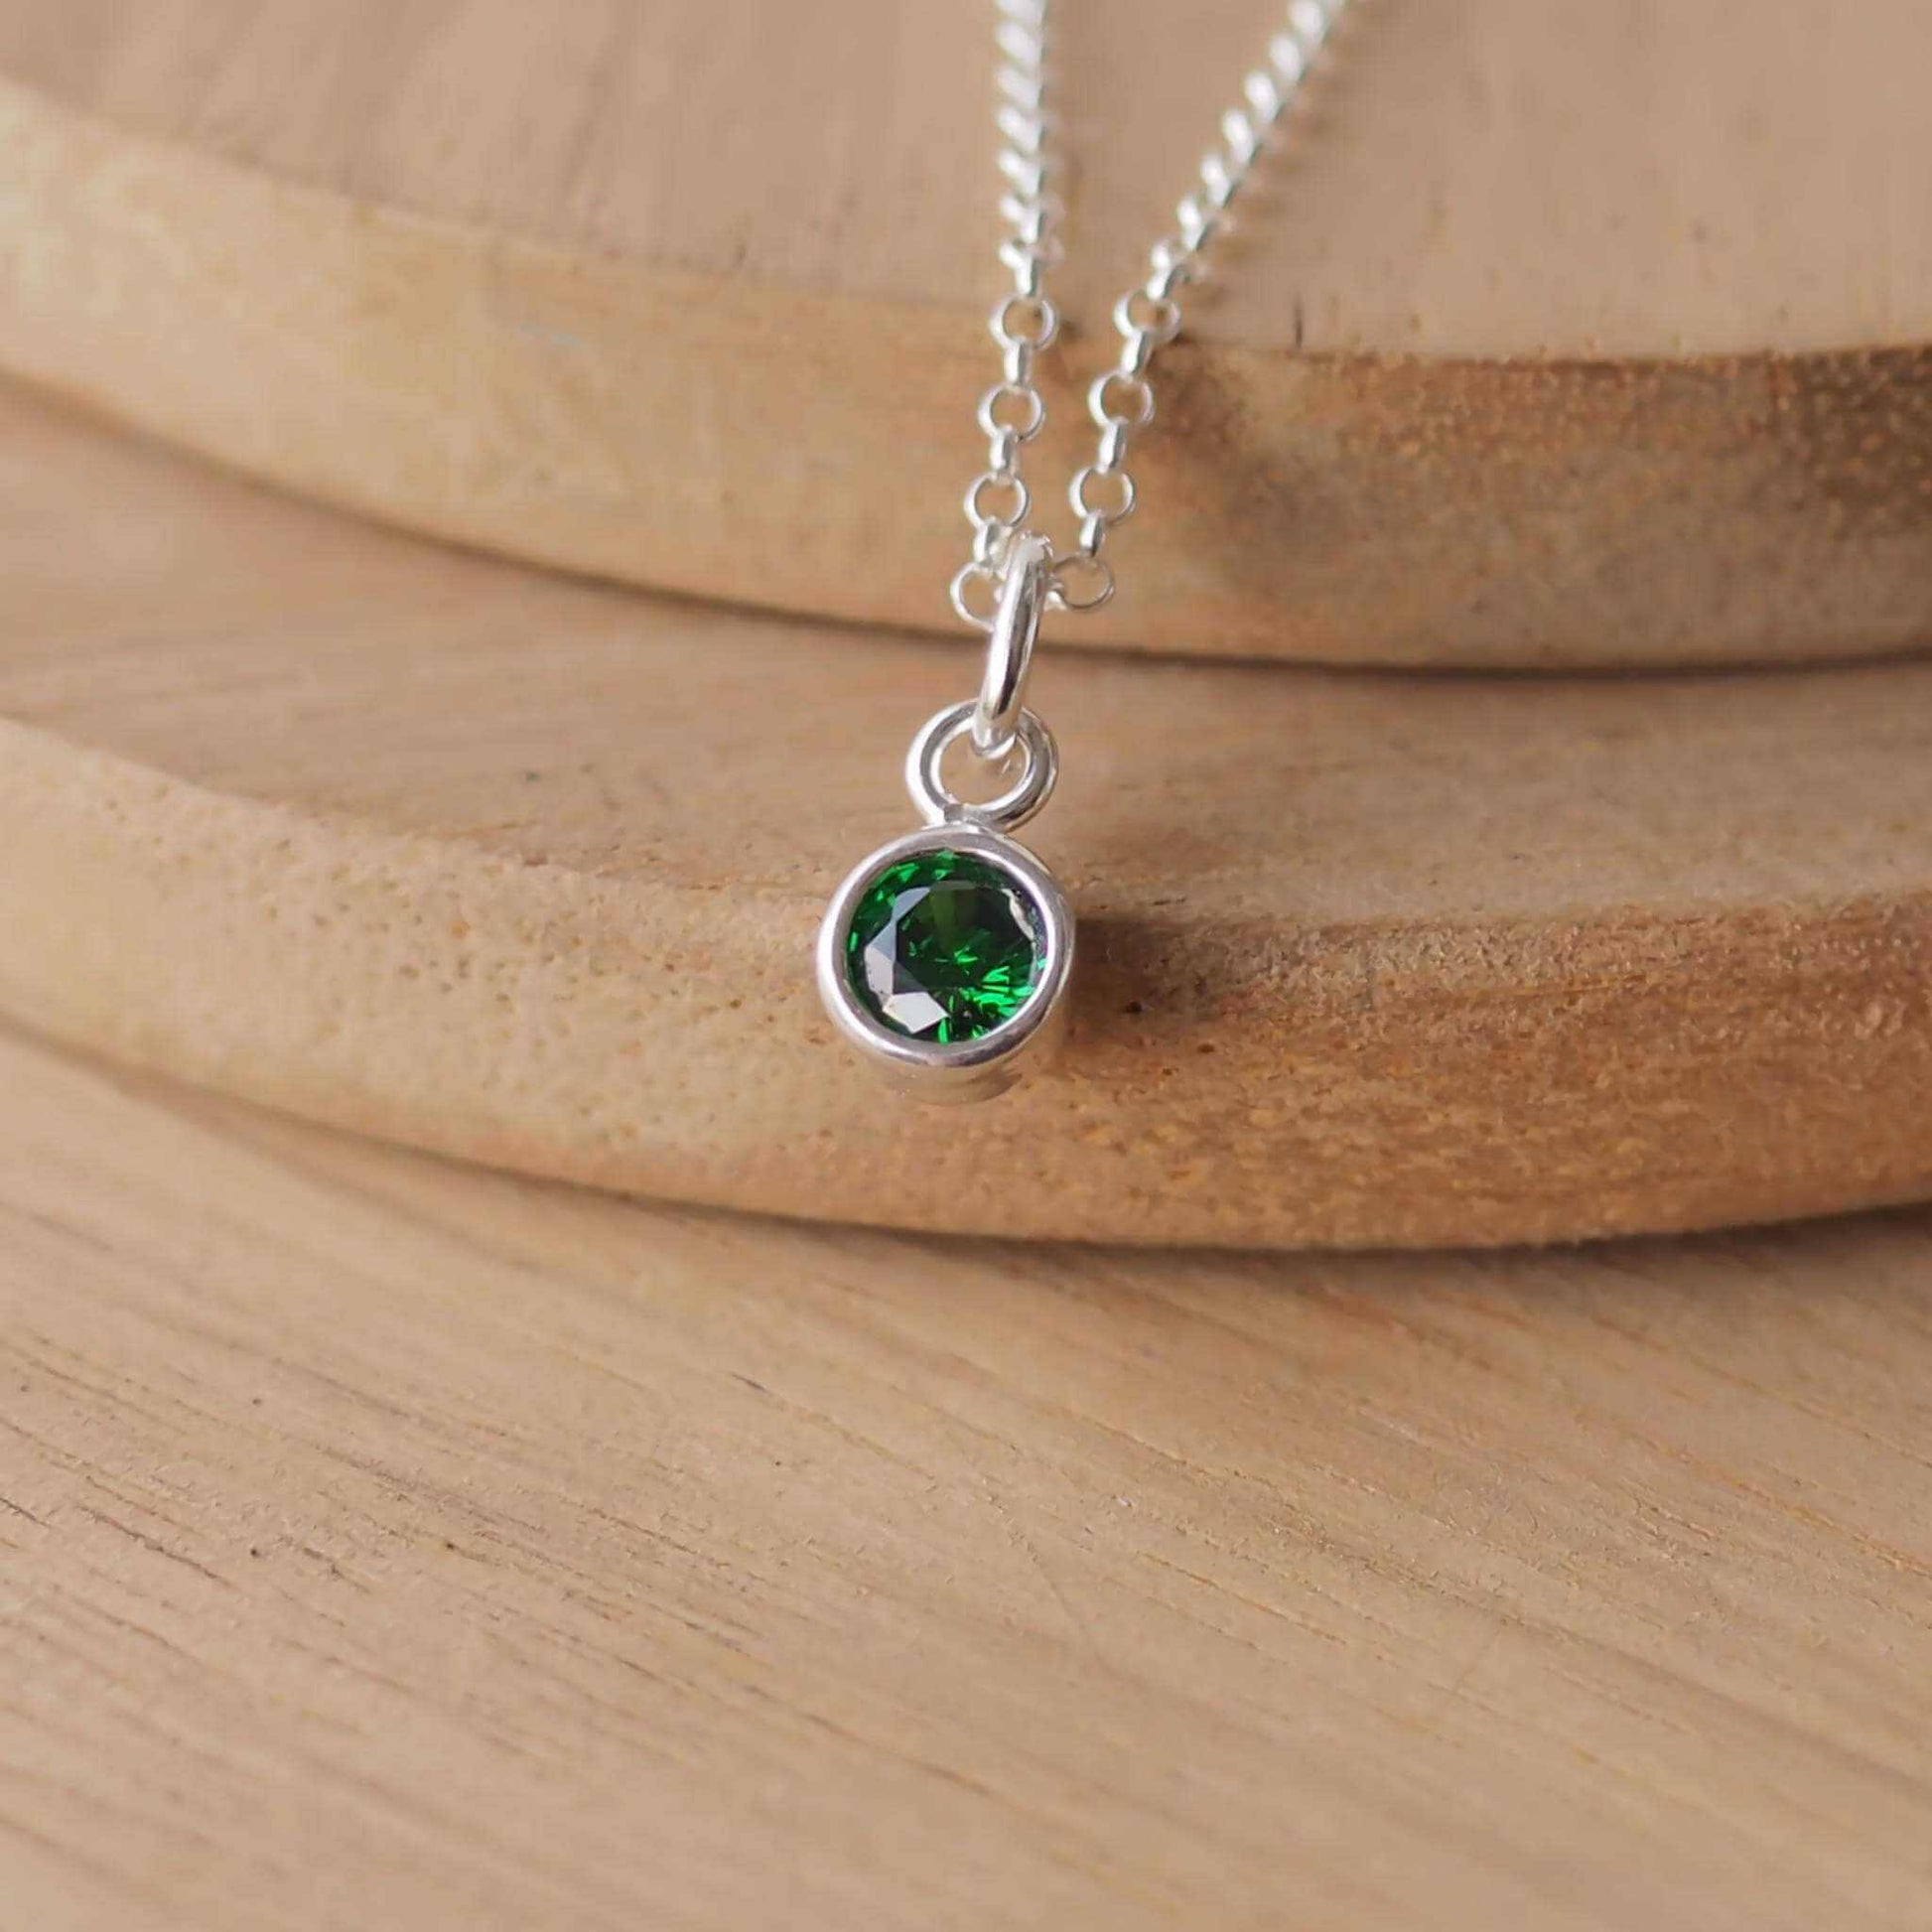 Small Sterling Silver and Cubic Zirconia Emerald Green necklace. A small 4mm faceted round rich green gemstone with a simple silver setting on a trace style chain, suitable as a May Birthstone charm . Handmade in Scotland by Maram Jewellery